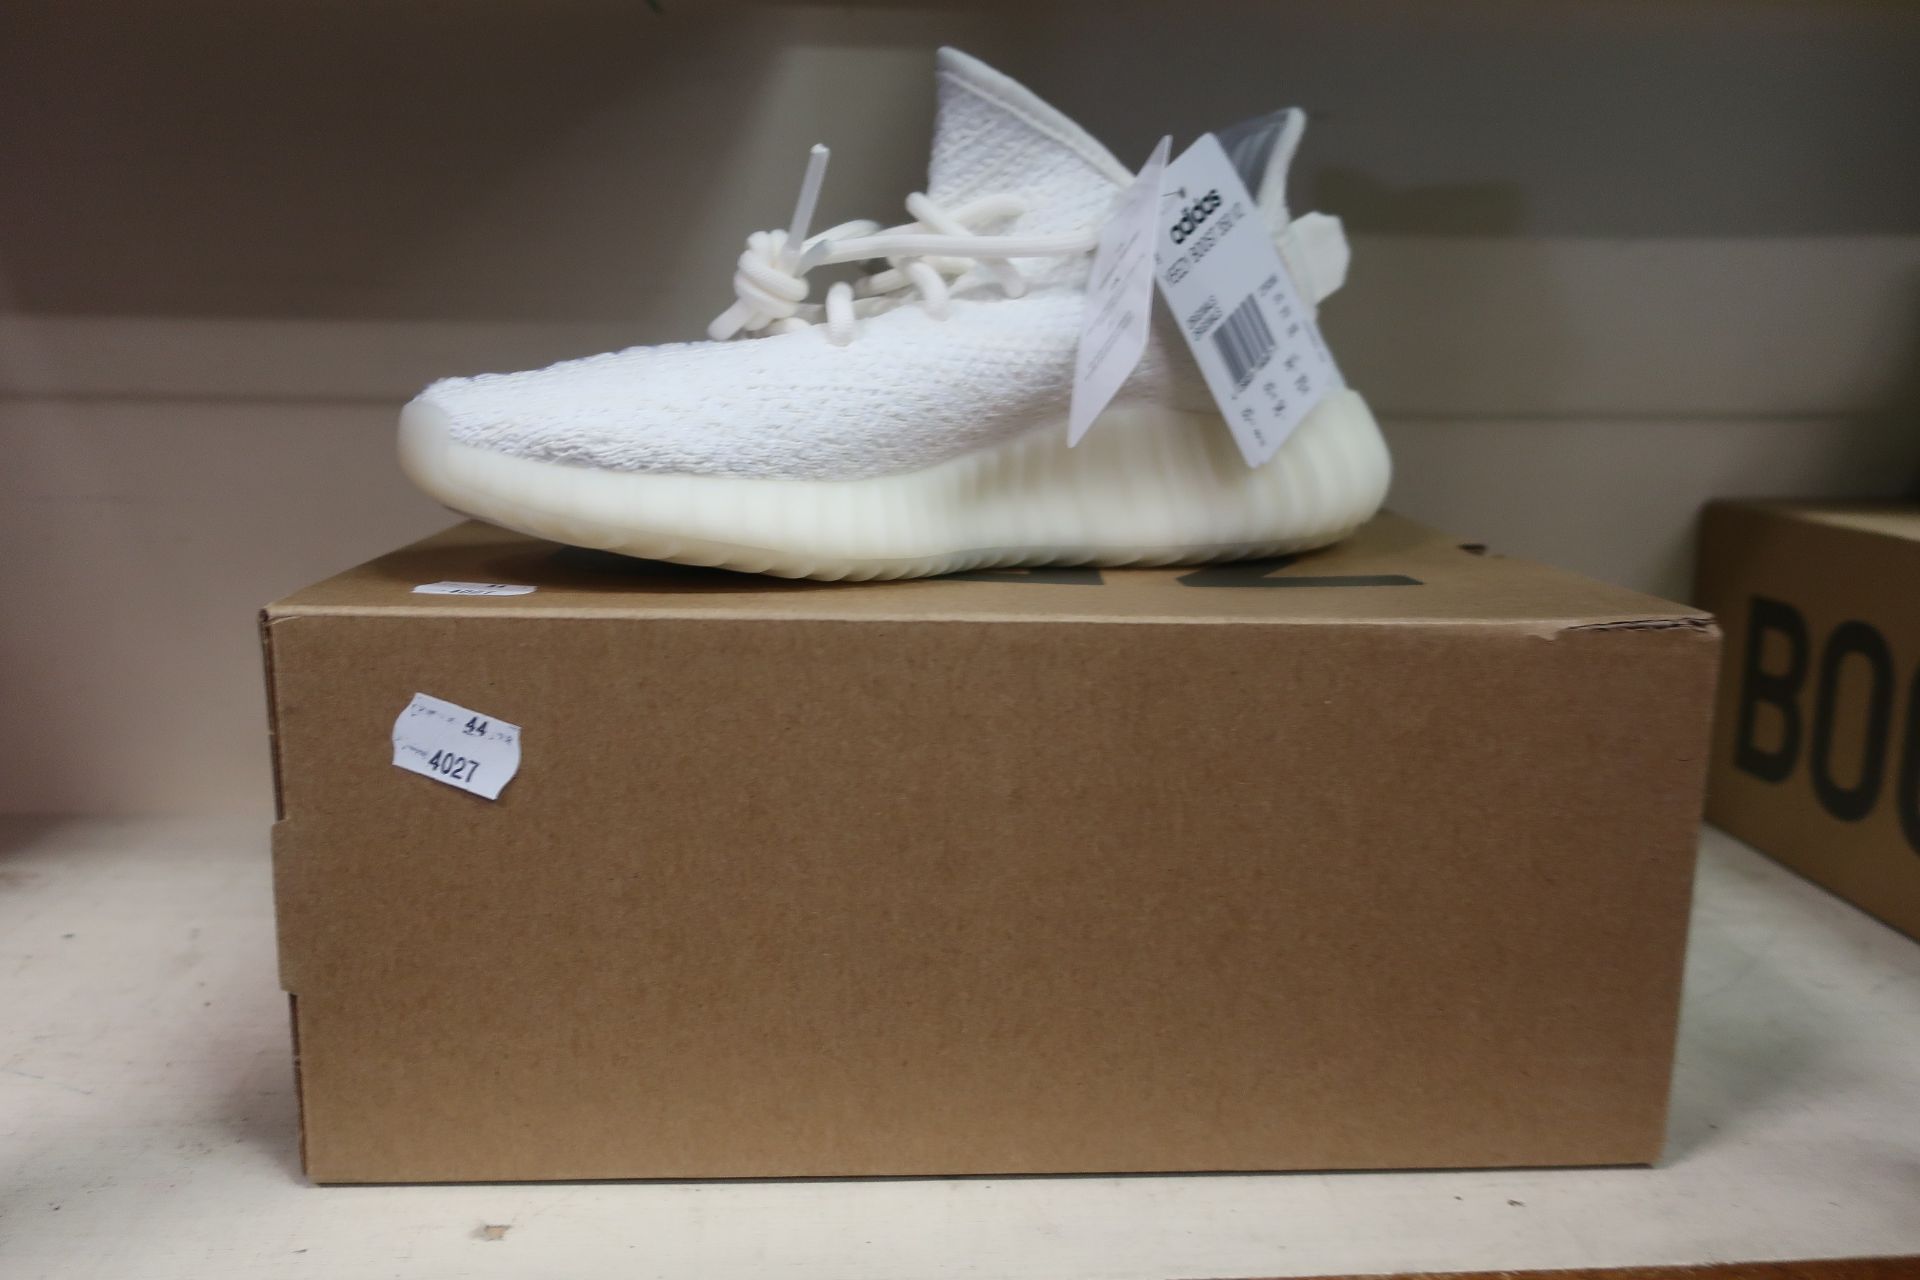 A pair of as new Adidas Yeezy Boost 350 V2 trainers in white (UK 5.5).